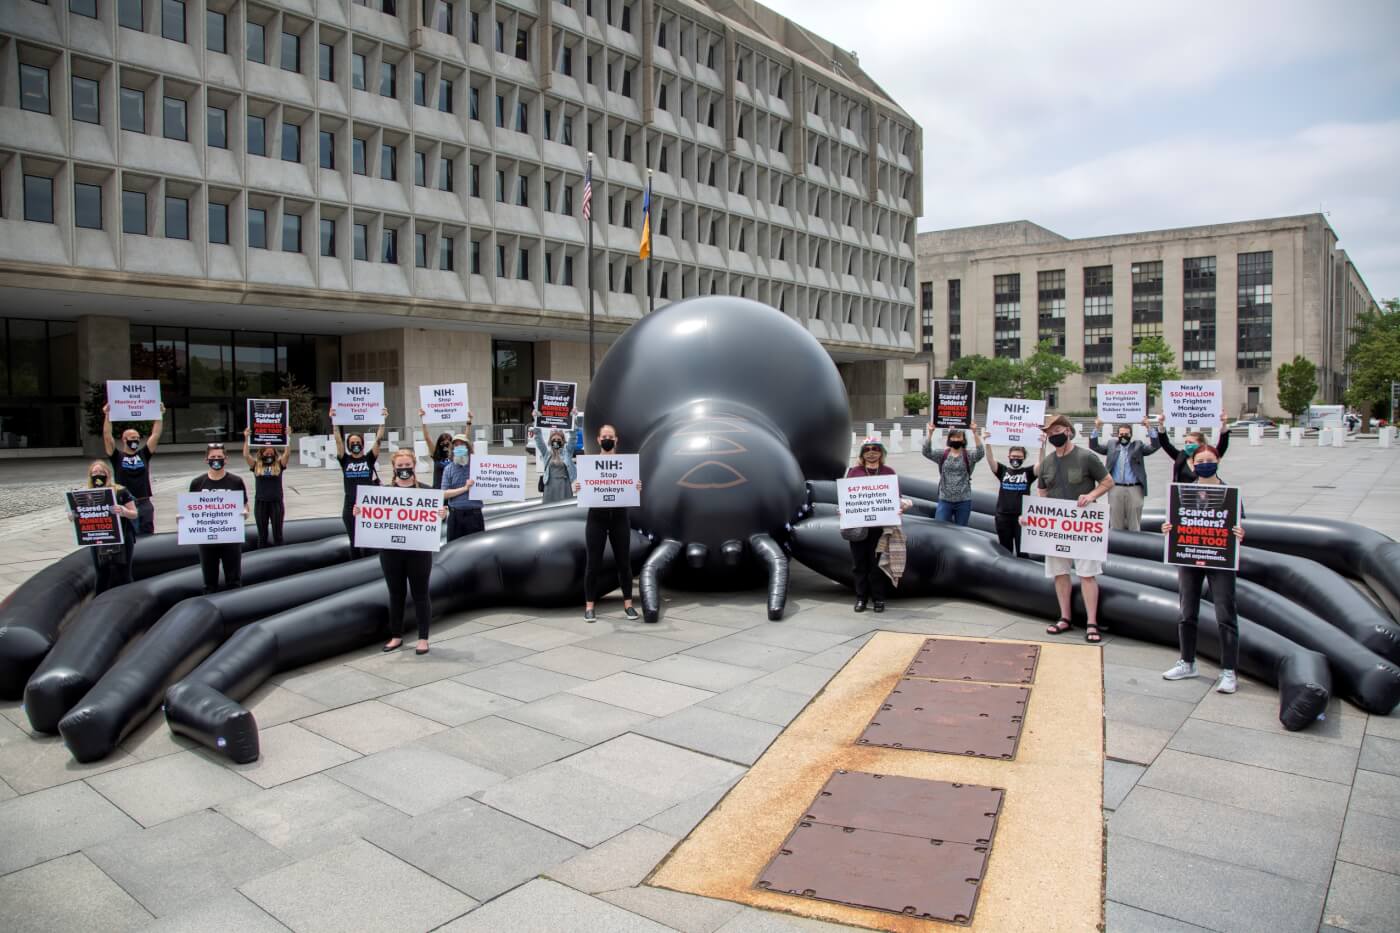 PETA Demonstrators with giant spider at National Institutes of Health